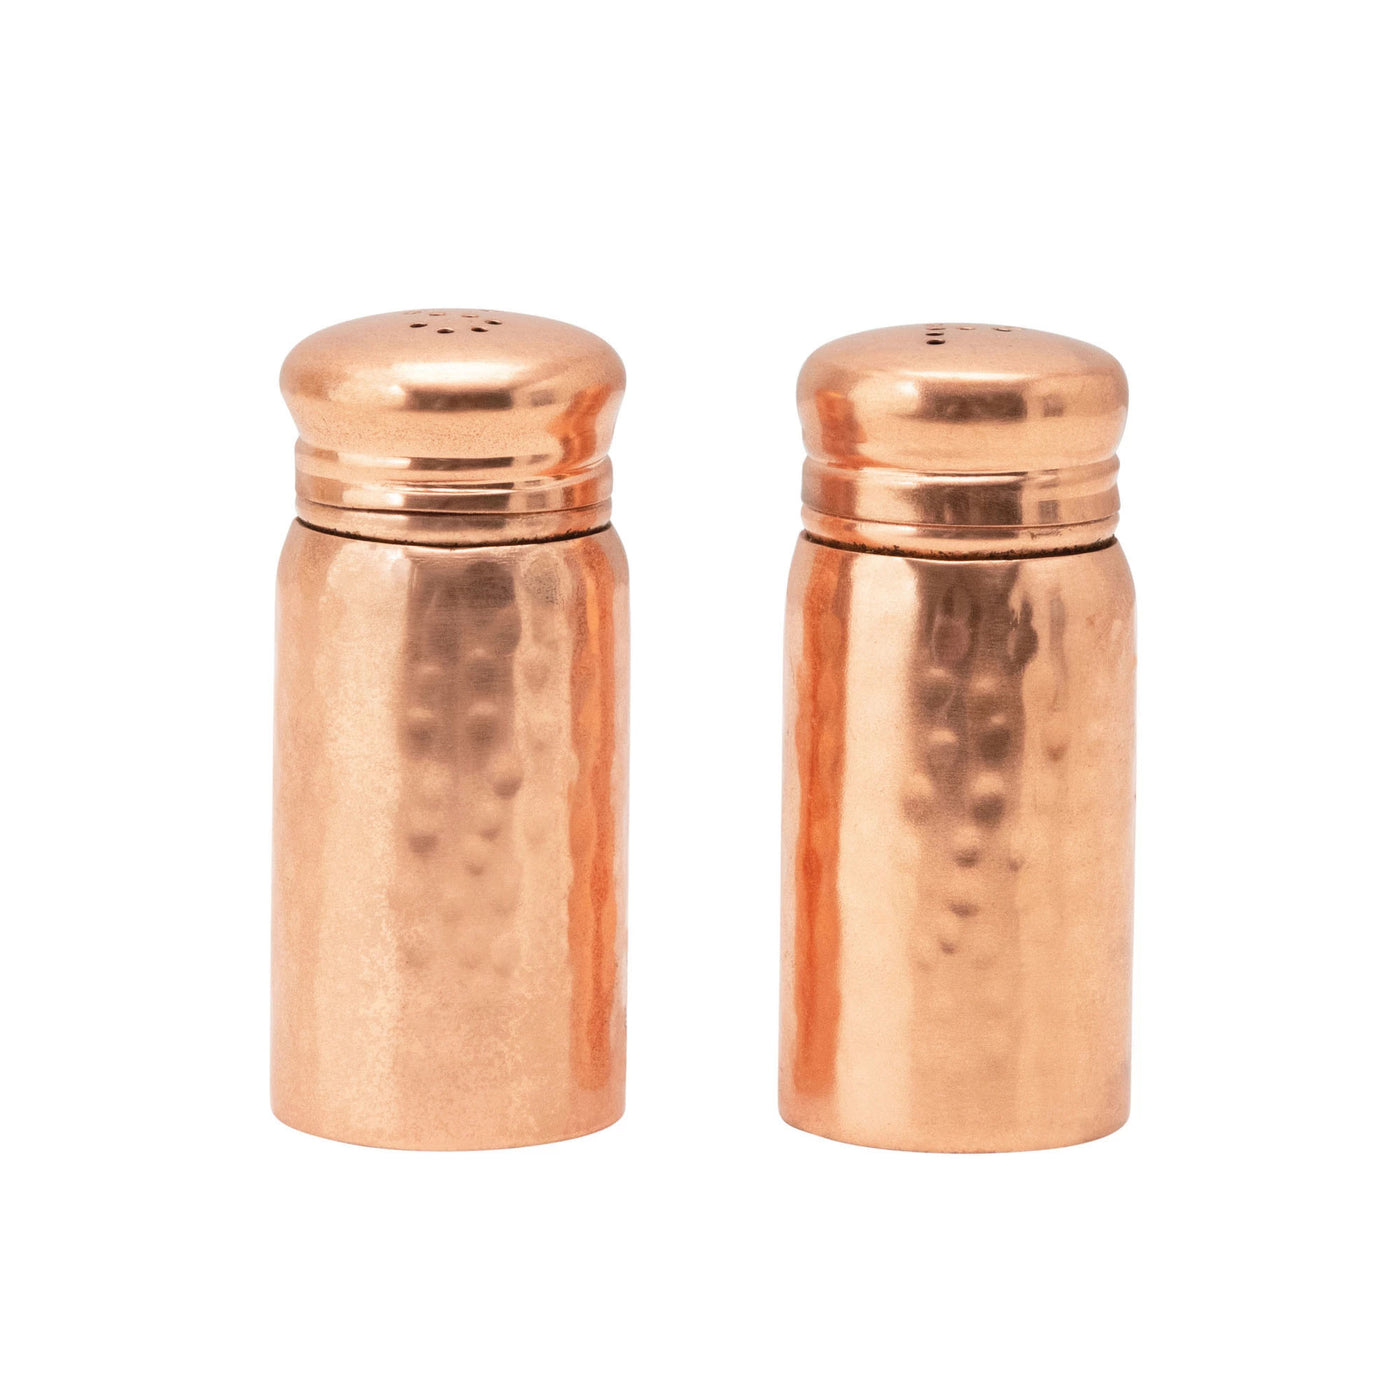 Copper Finished Salt and Pepper Shakers